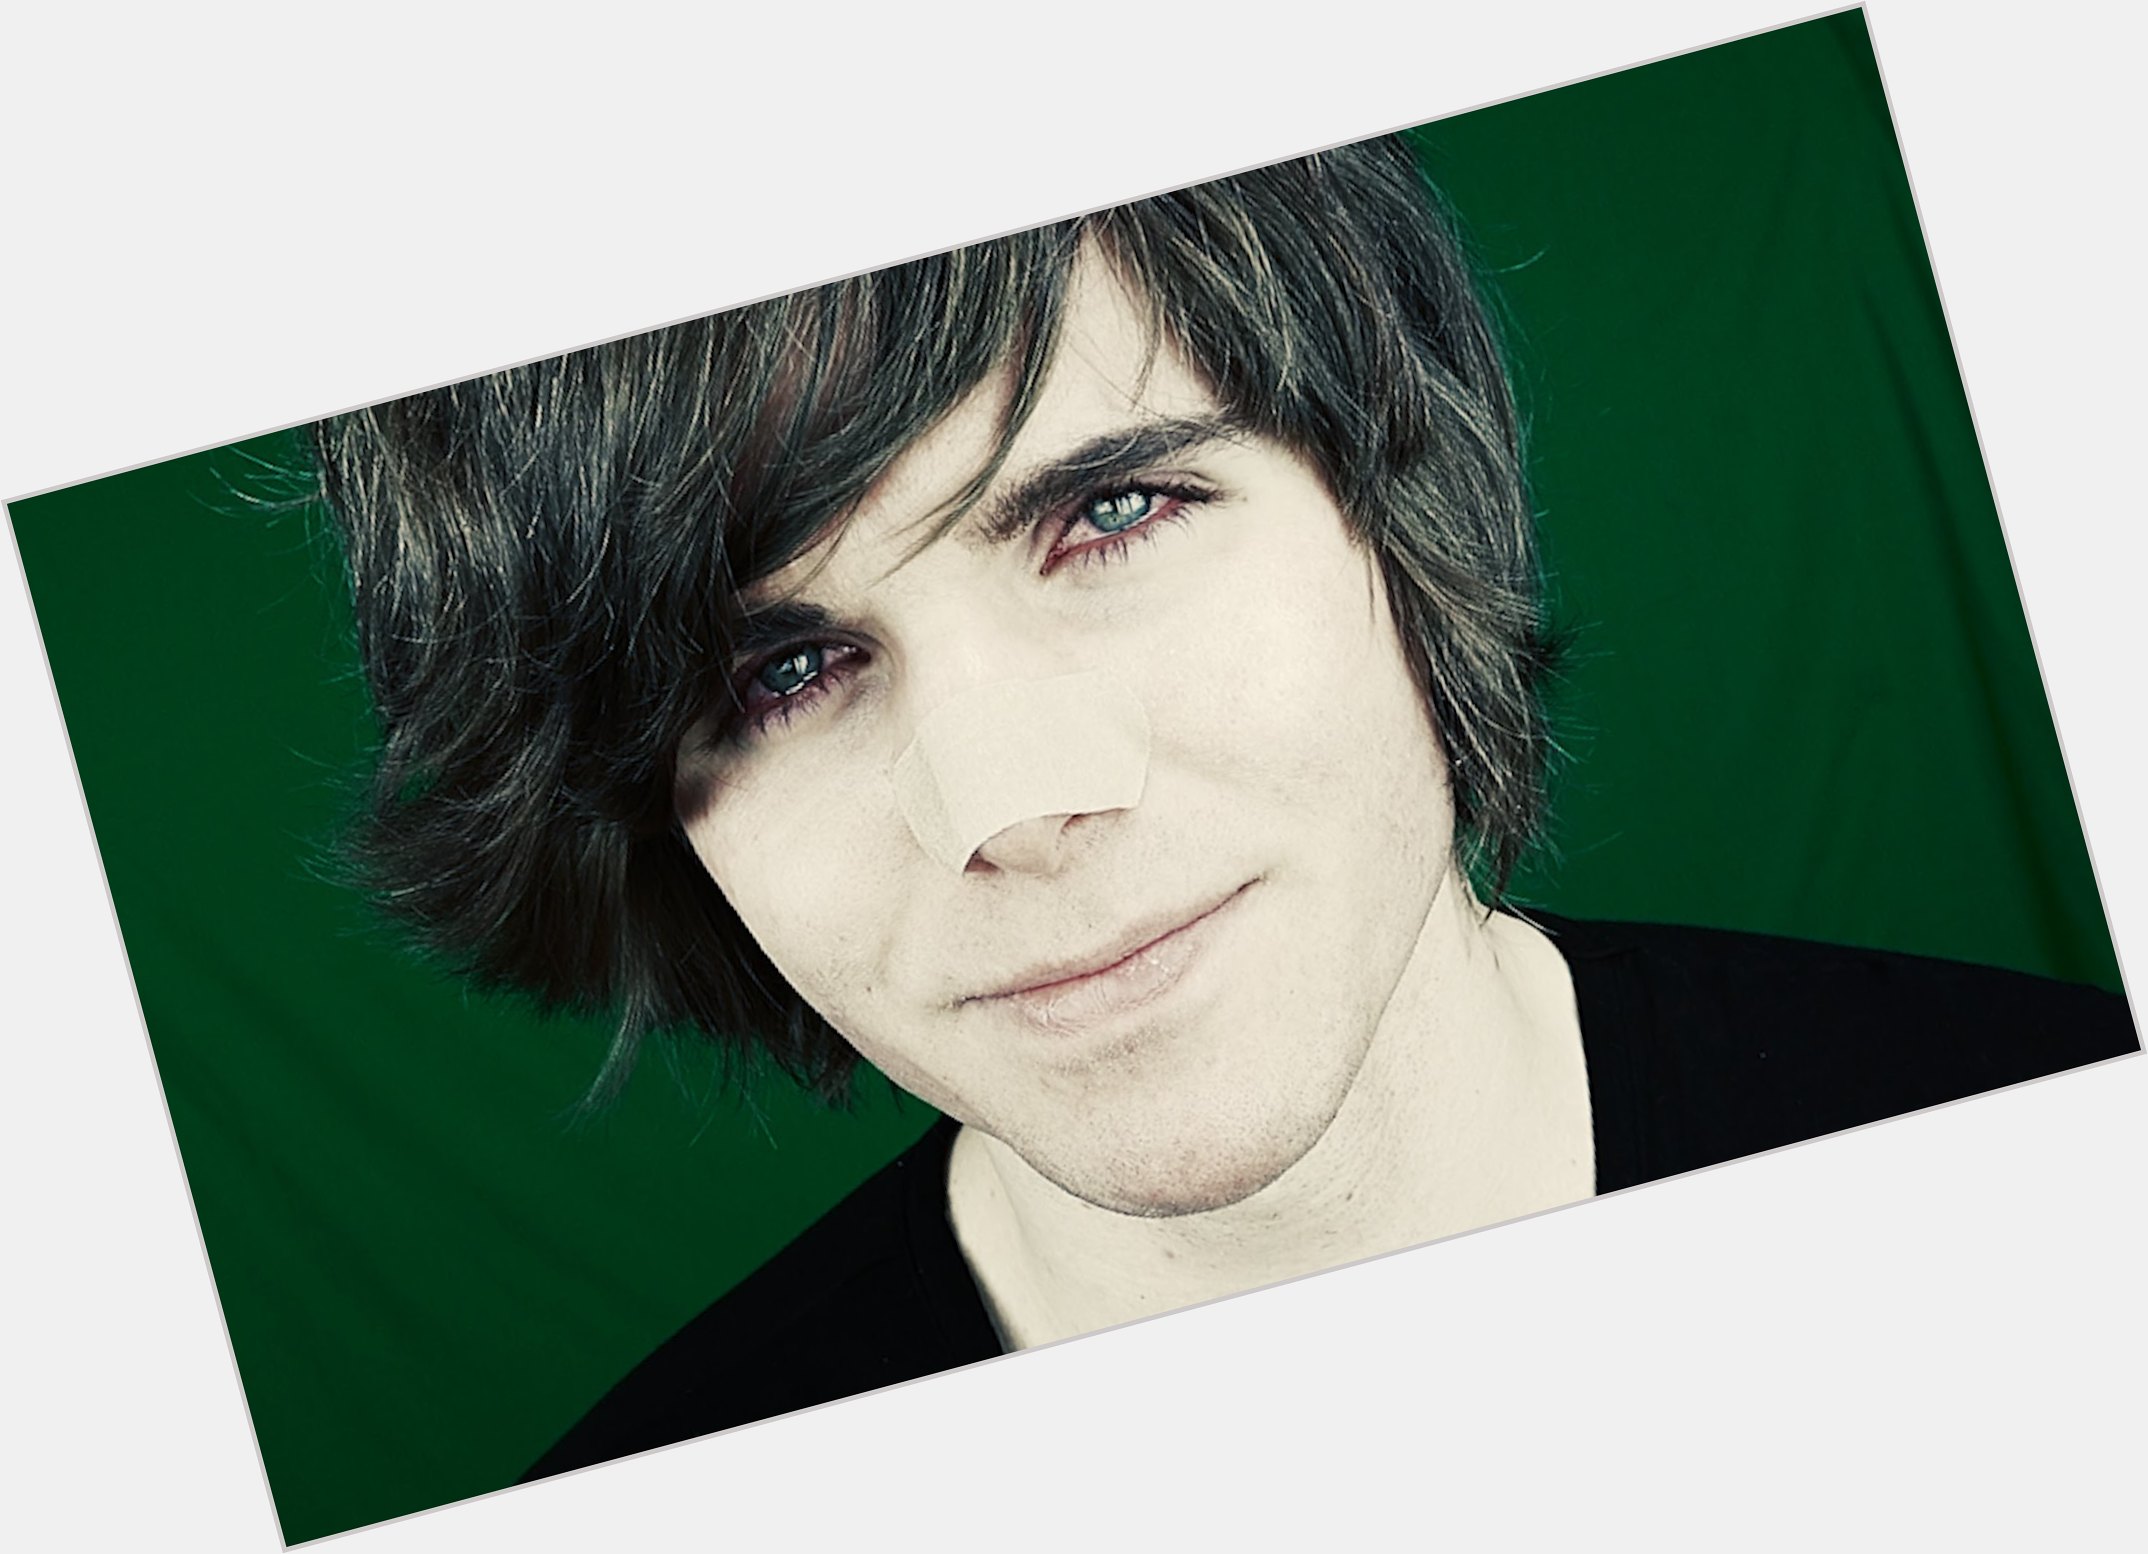 Https://fanpagepress.net/m/O/Onision New Pic 1